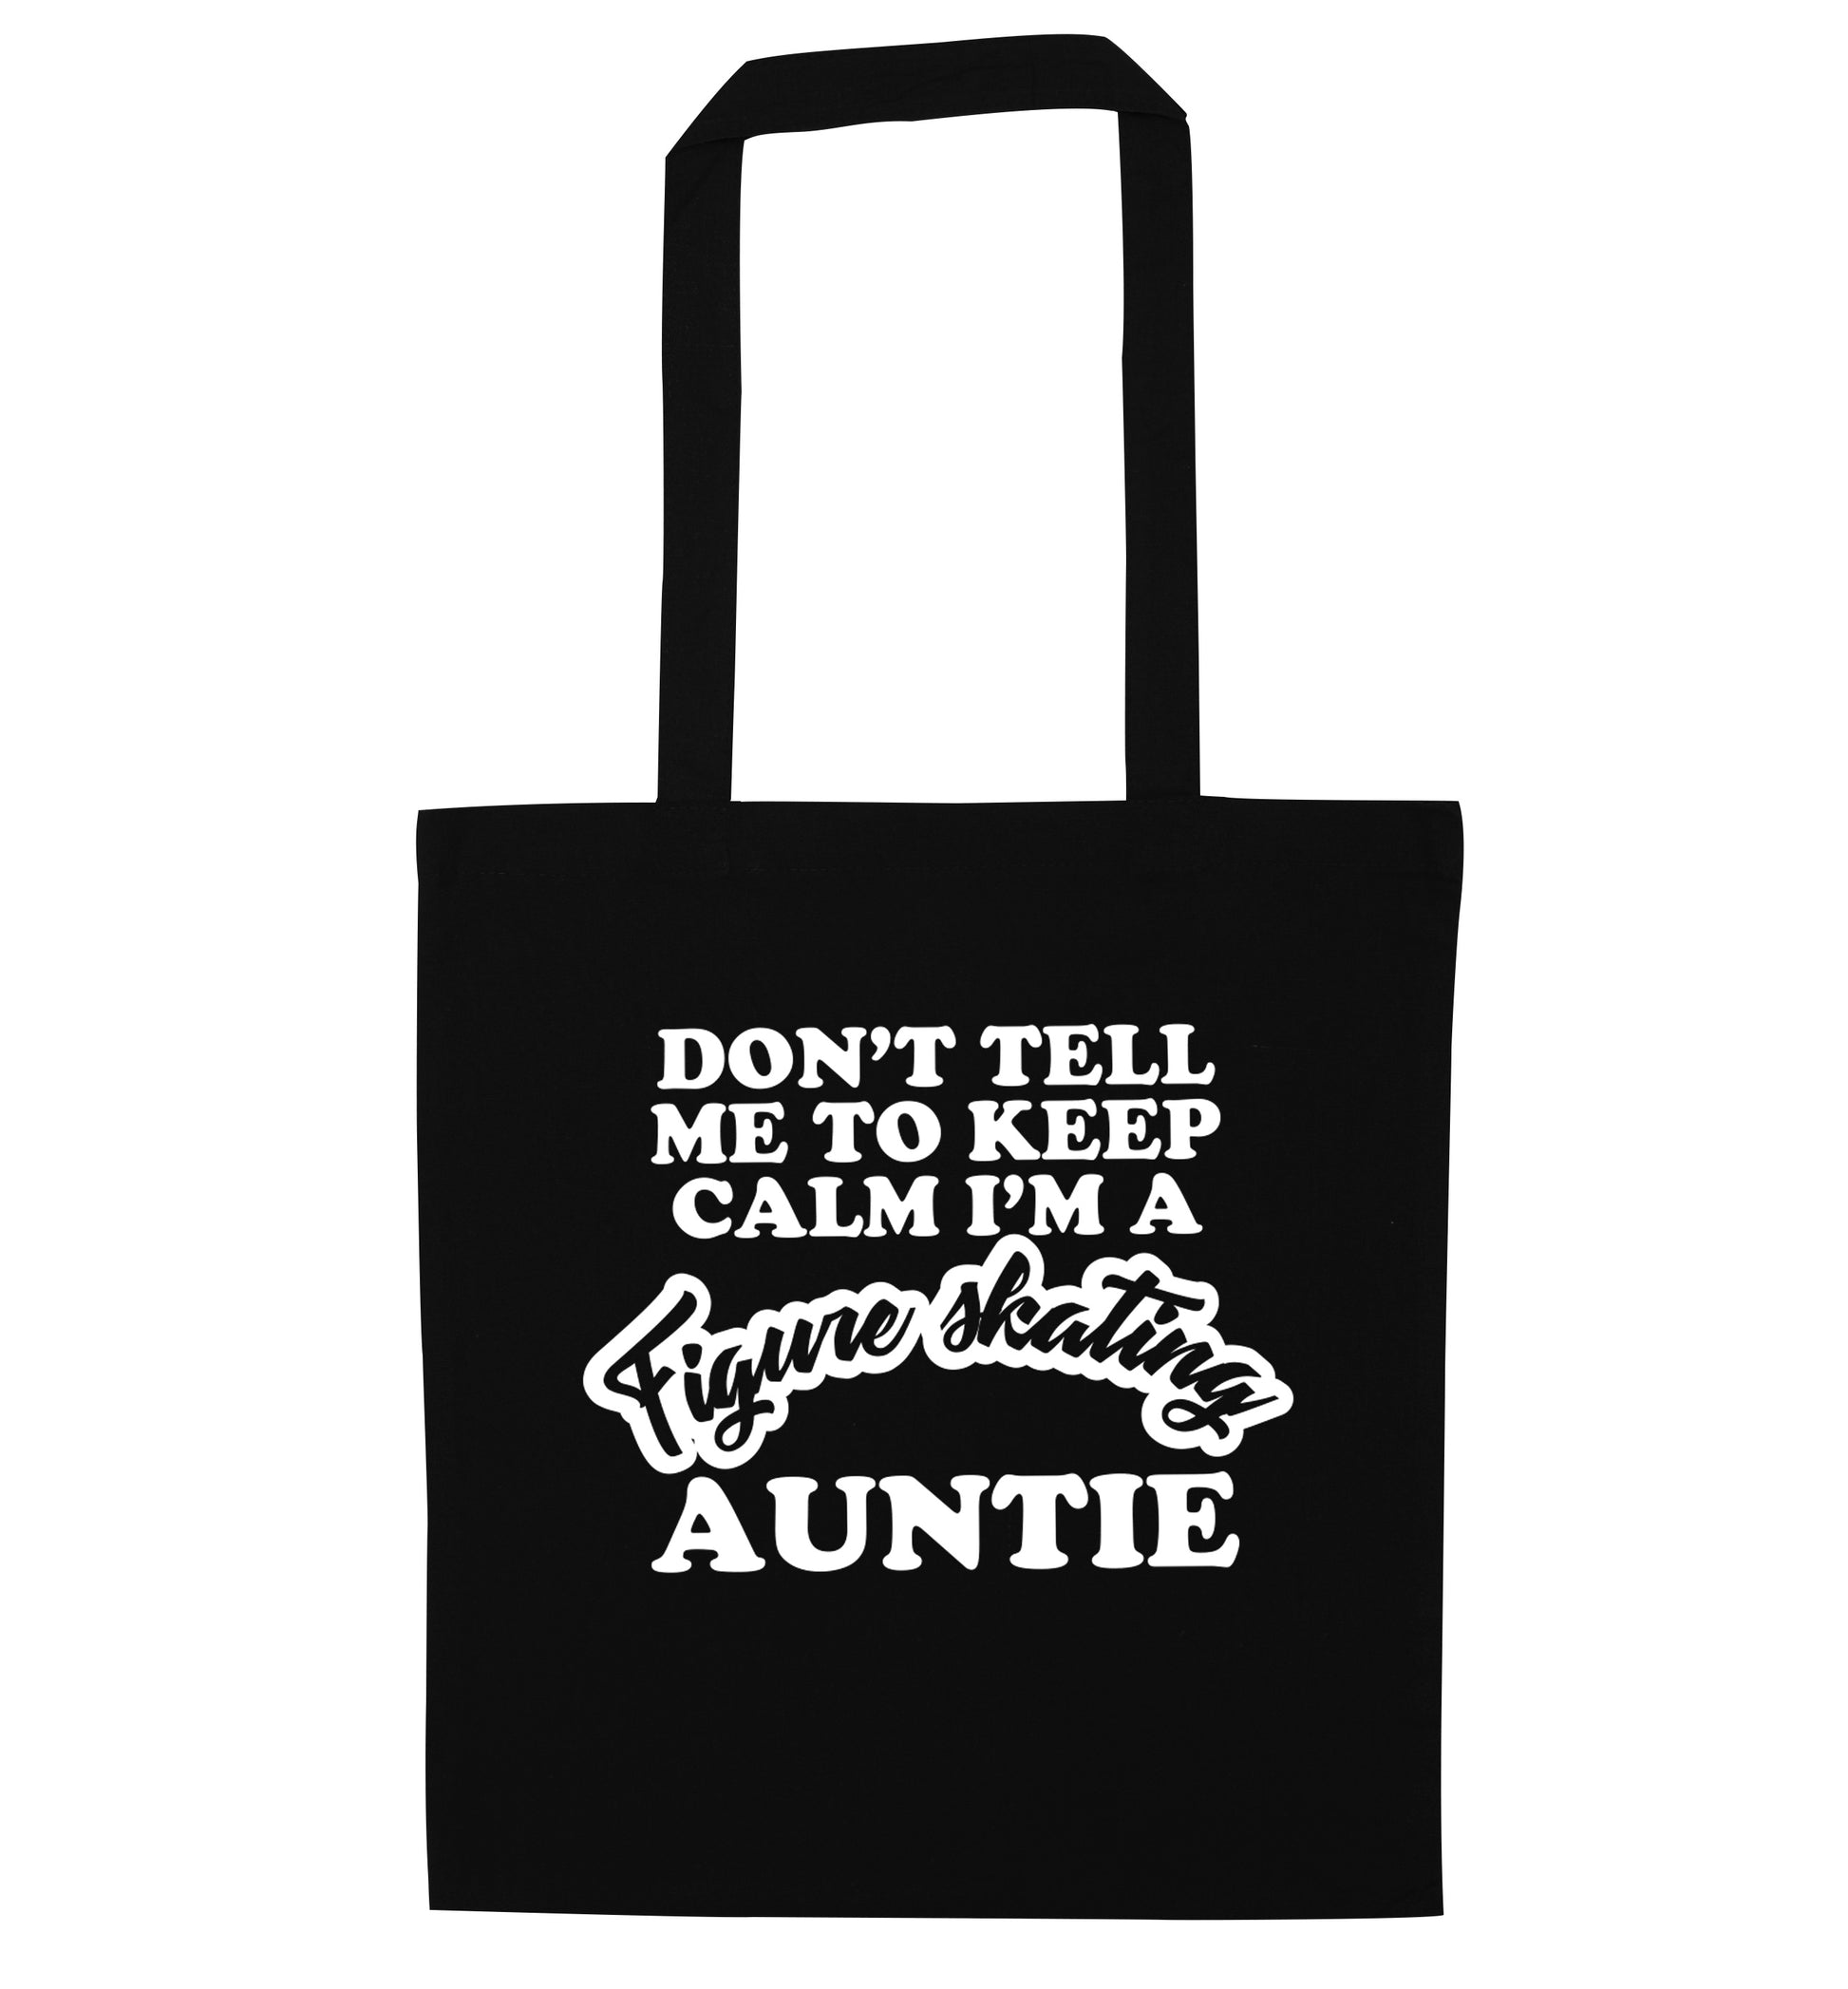 Don't tell me to keep calm I'm a figure skating auntie black tote bag